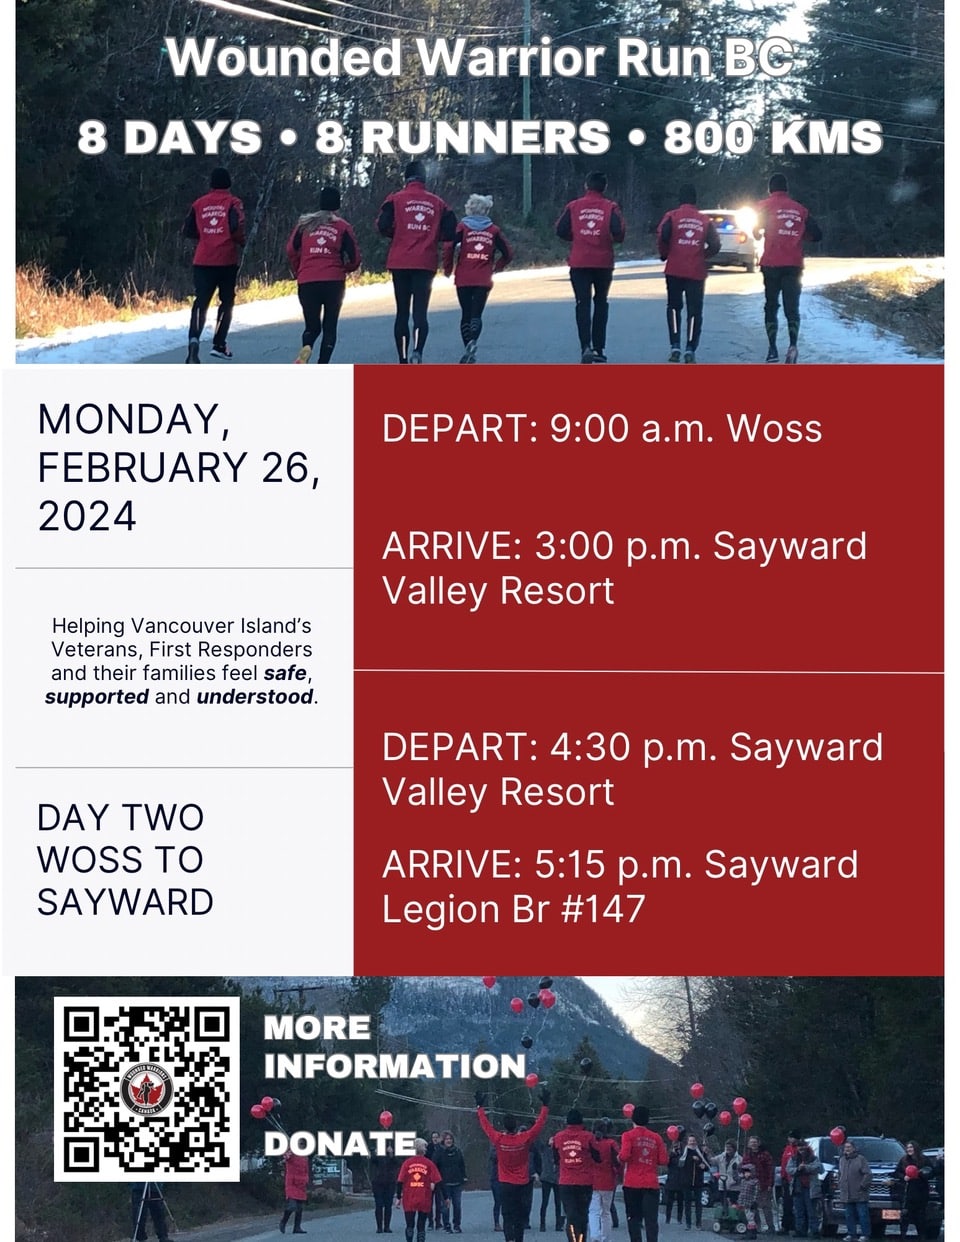 Wounded Warriors Run BC - Monday February 26, 2024